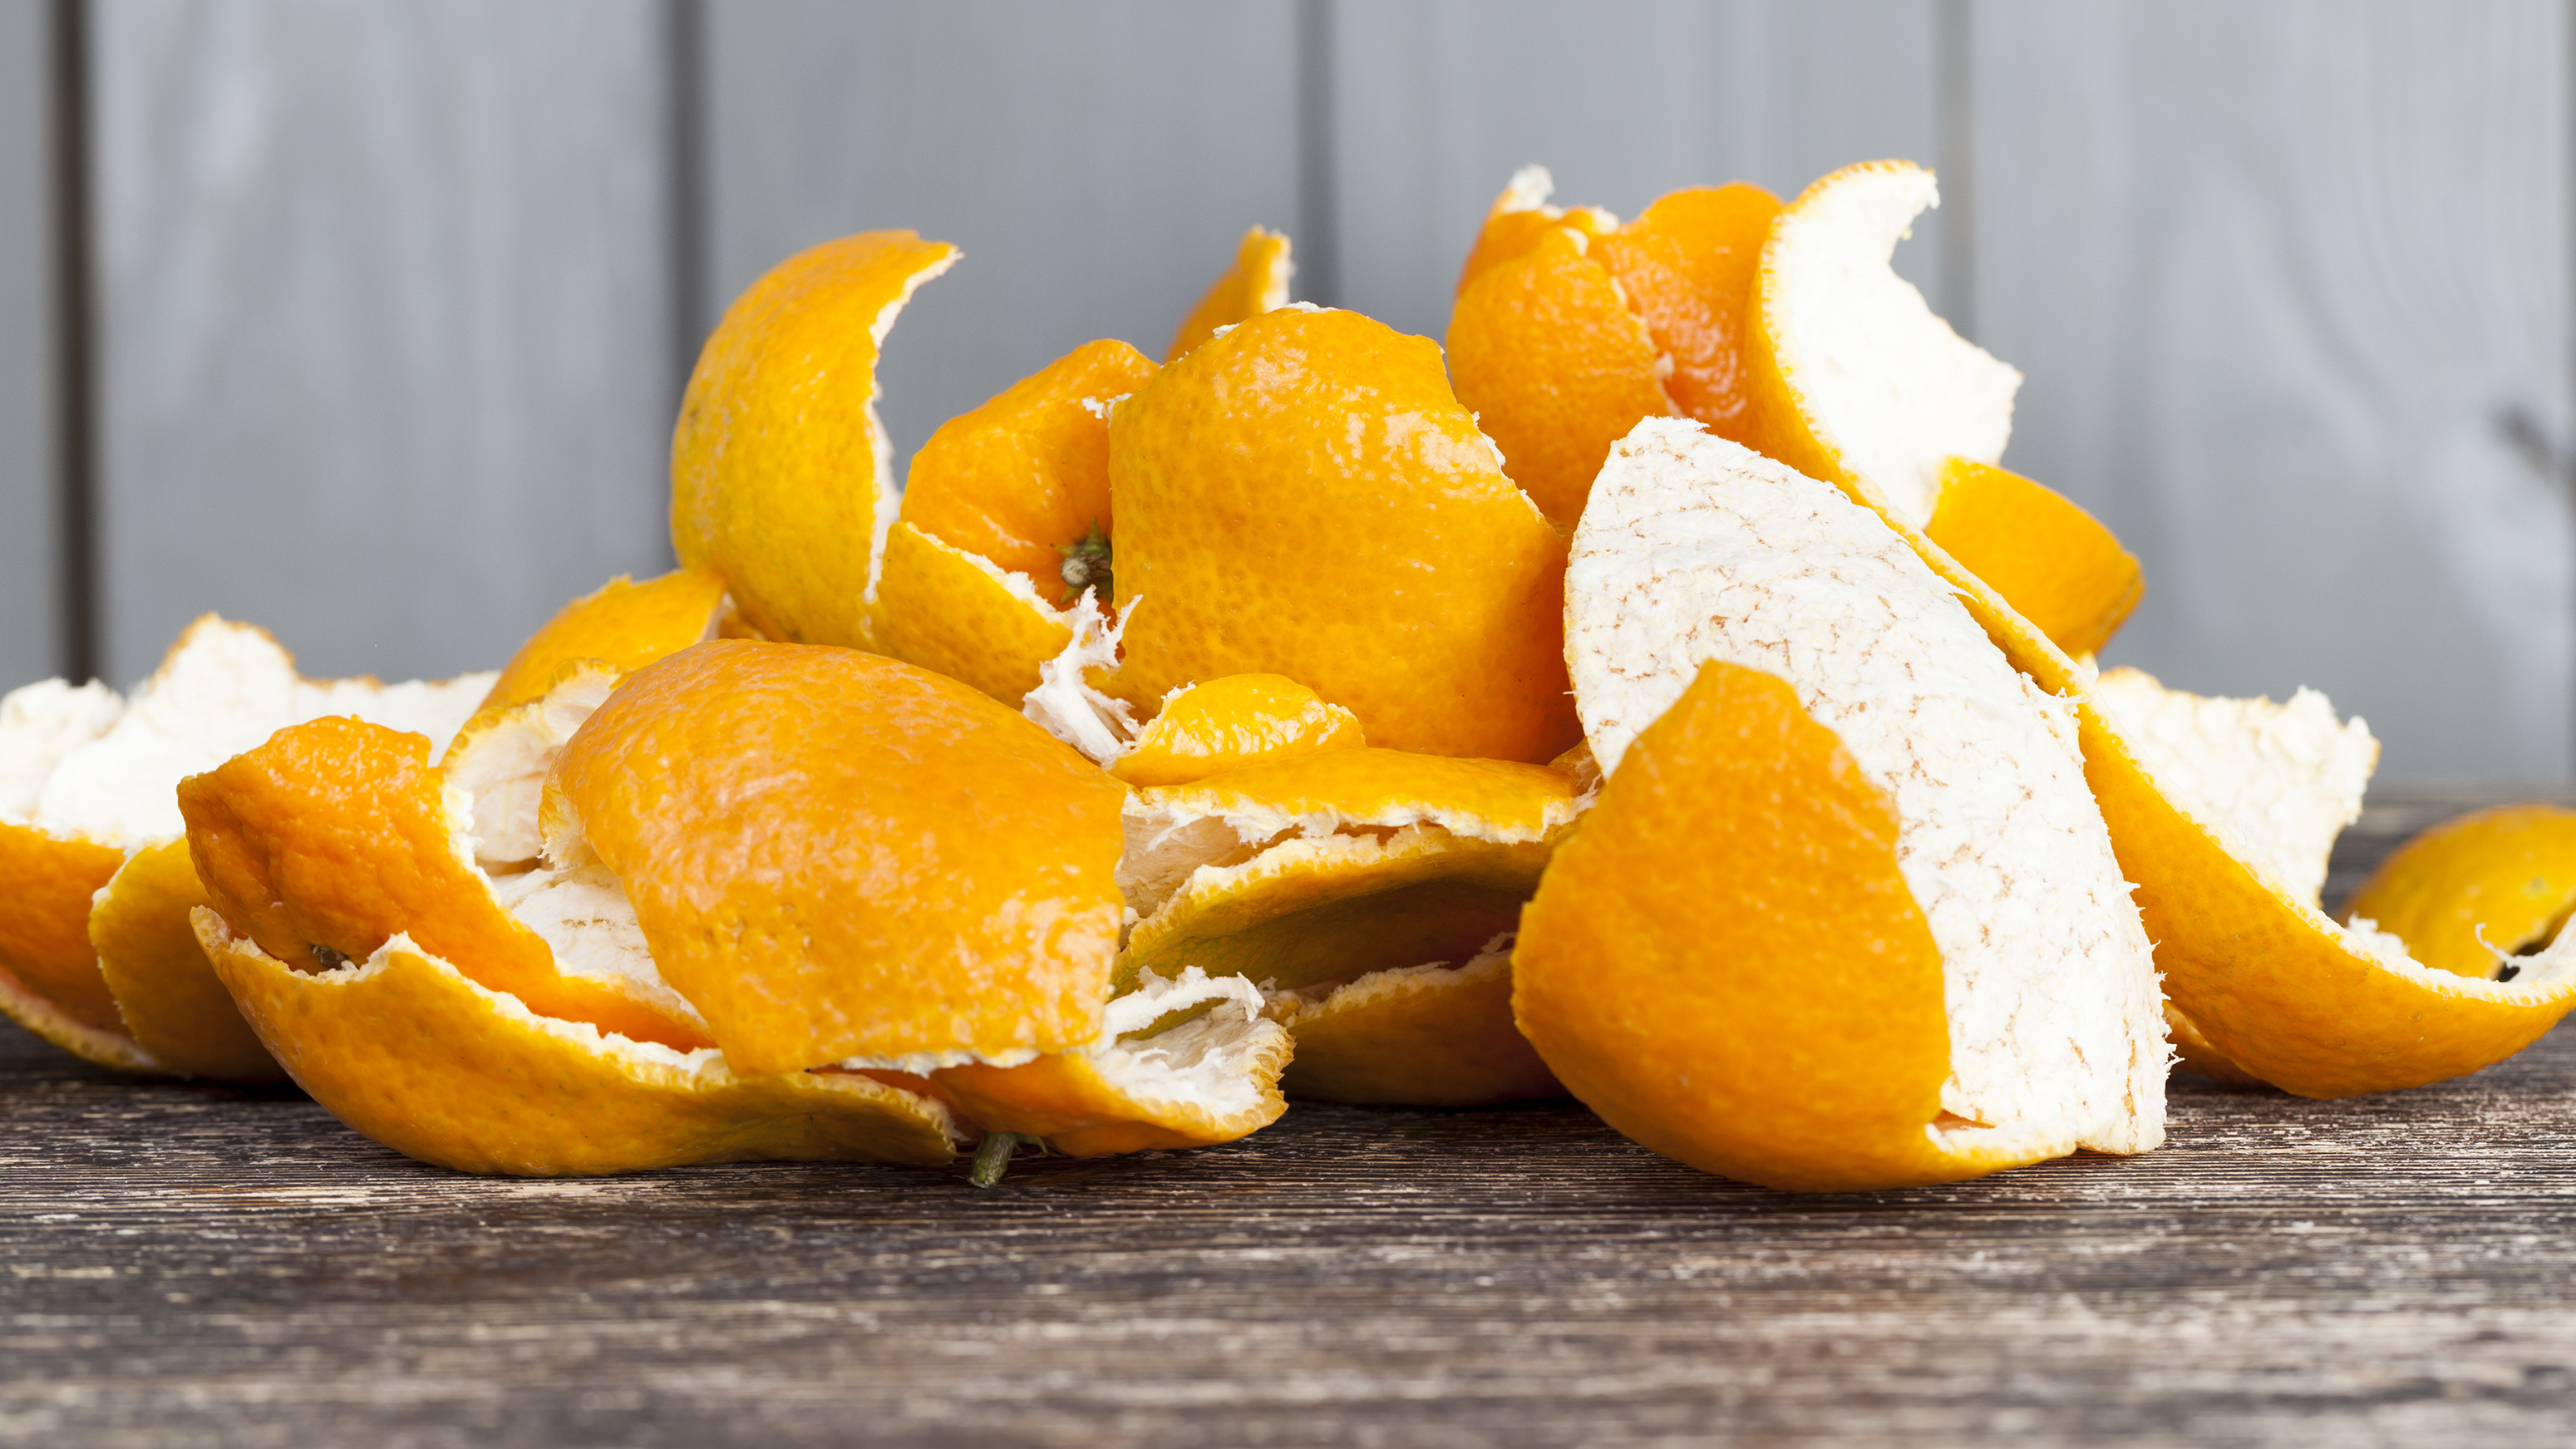 How to Make & Use Freeze-Dried Orange Juice - Growing In The Garden